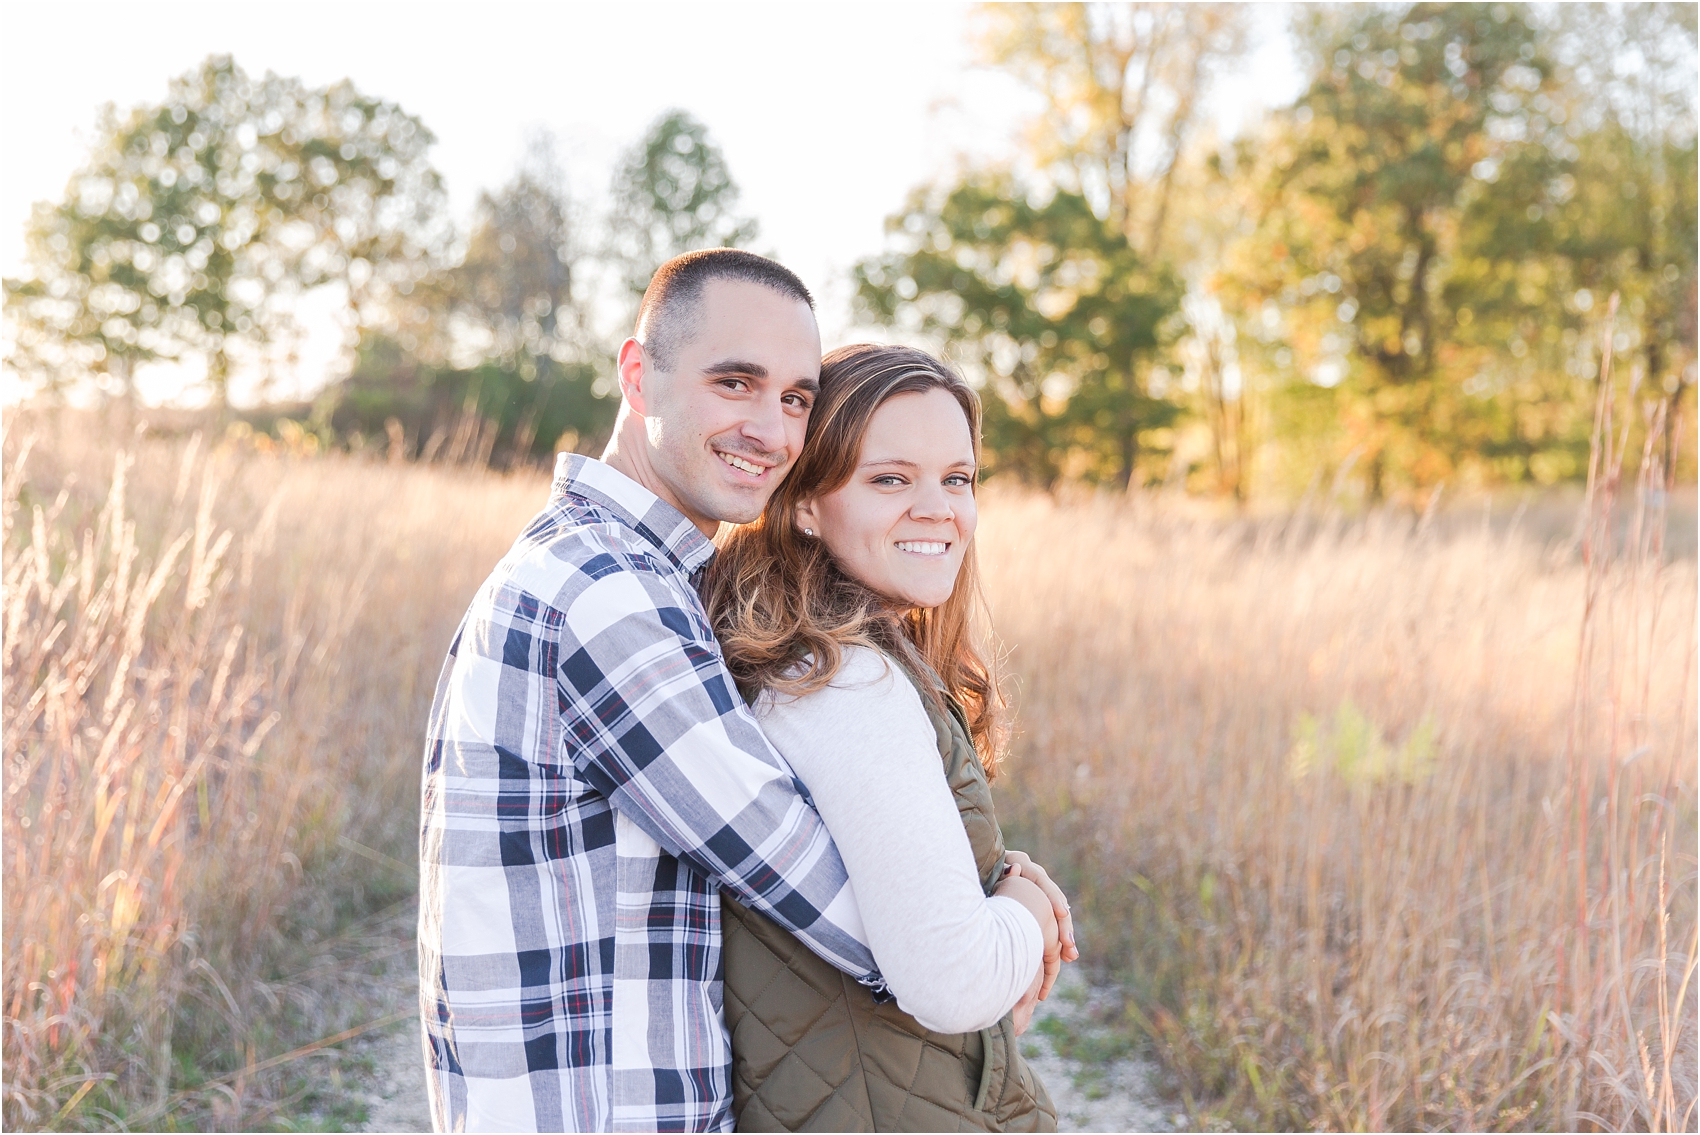 romantic-fall-engagement-photos-at-indian-springs-metropark-in-clarkston-mi-by-courtney-carolyn-photography_0003.jpg